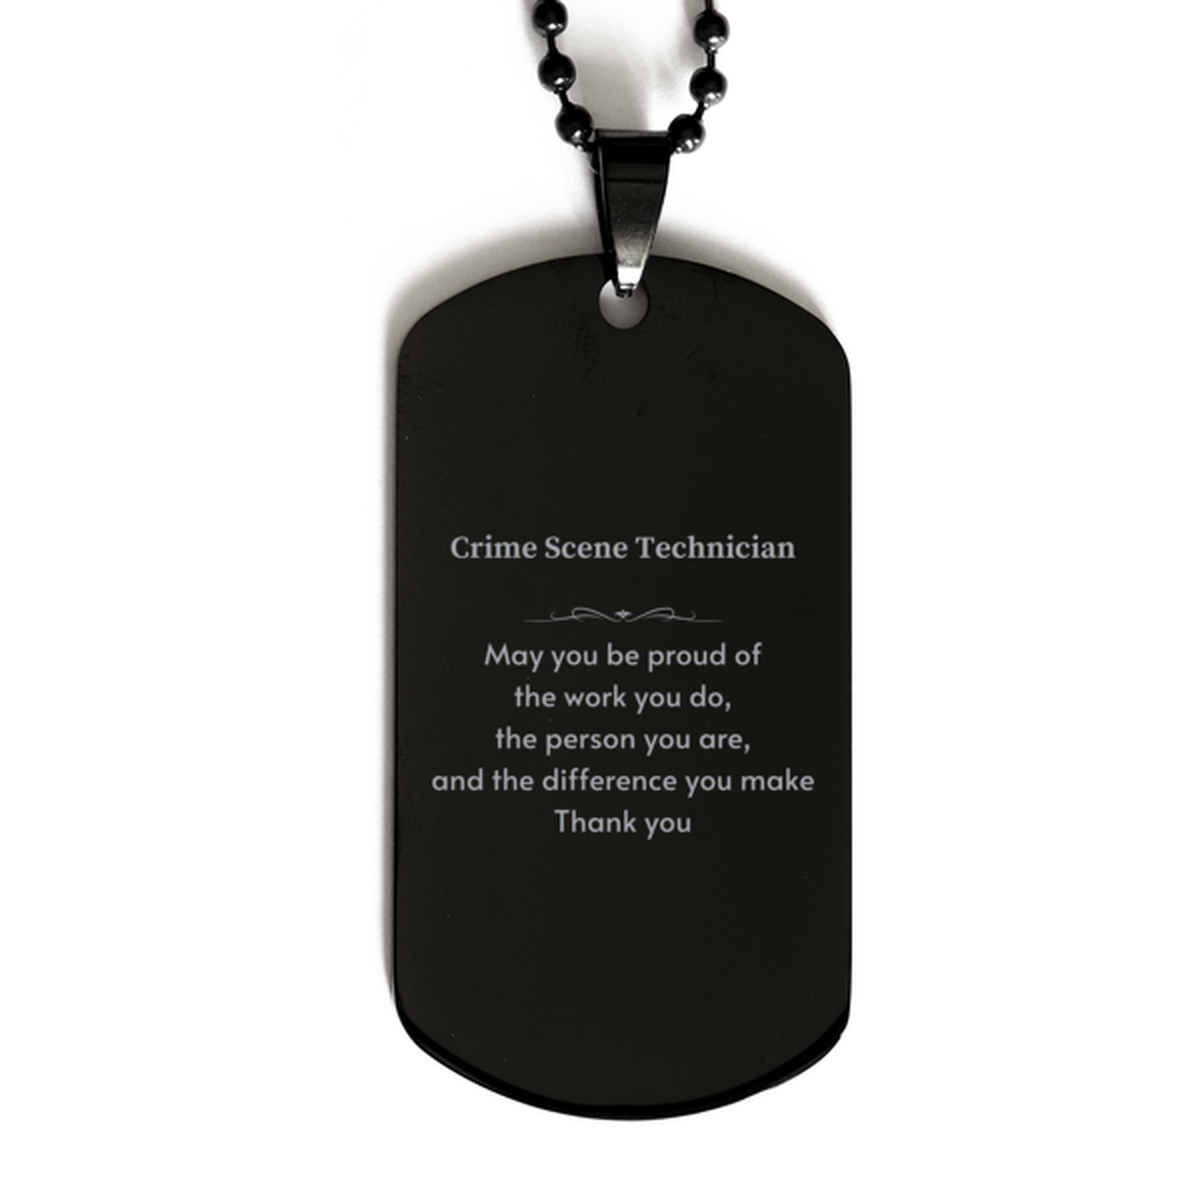 Heartwarming Black Dog Tag Retirement Coworkers Gifts for Crime Scene Technician, Crime Scene Technician May You be proud of the work you do, the person you are Gifts for Boss Men Women Friends